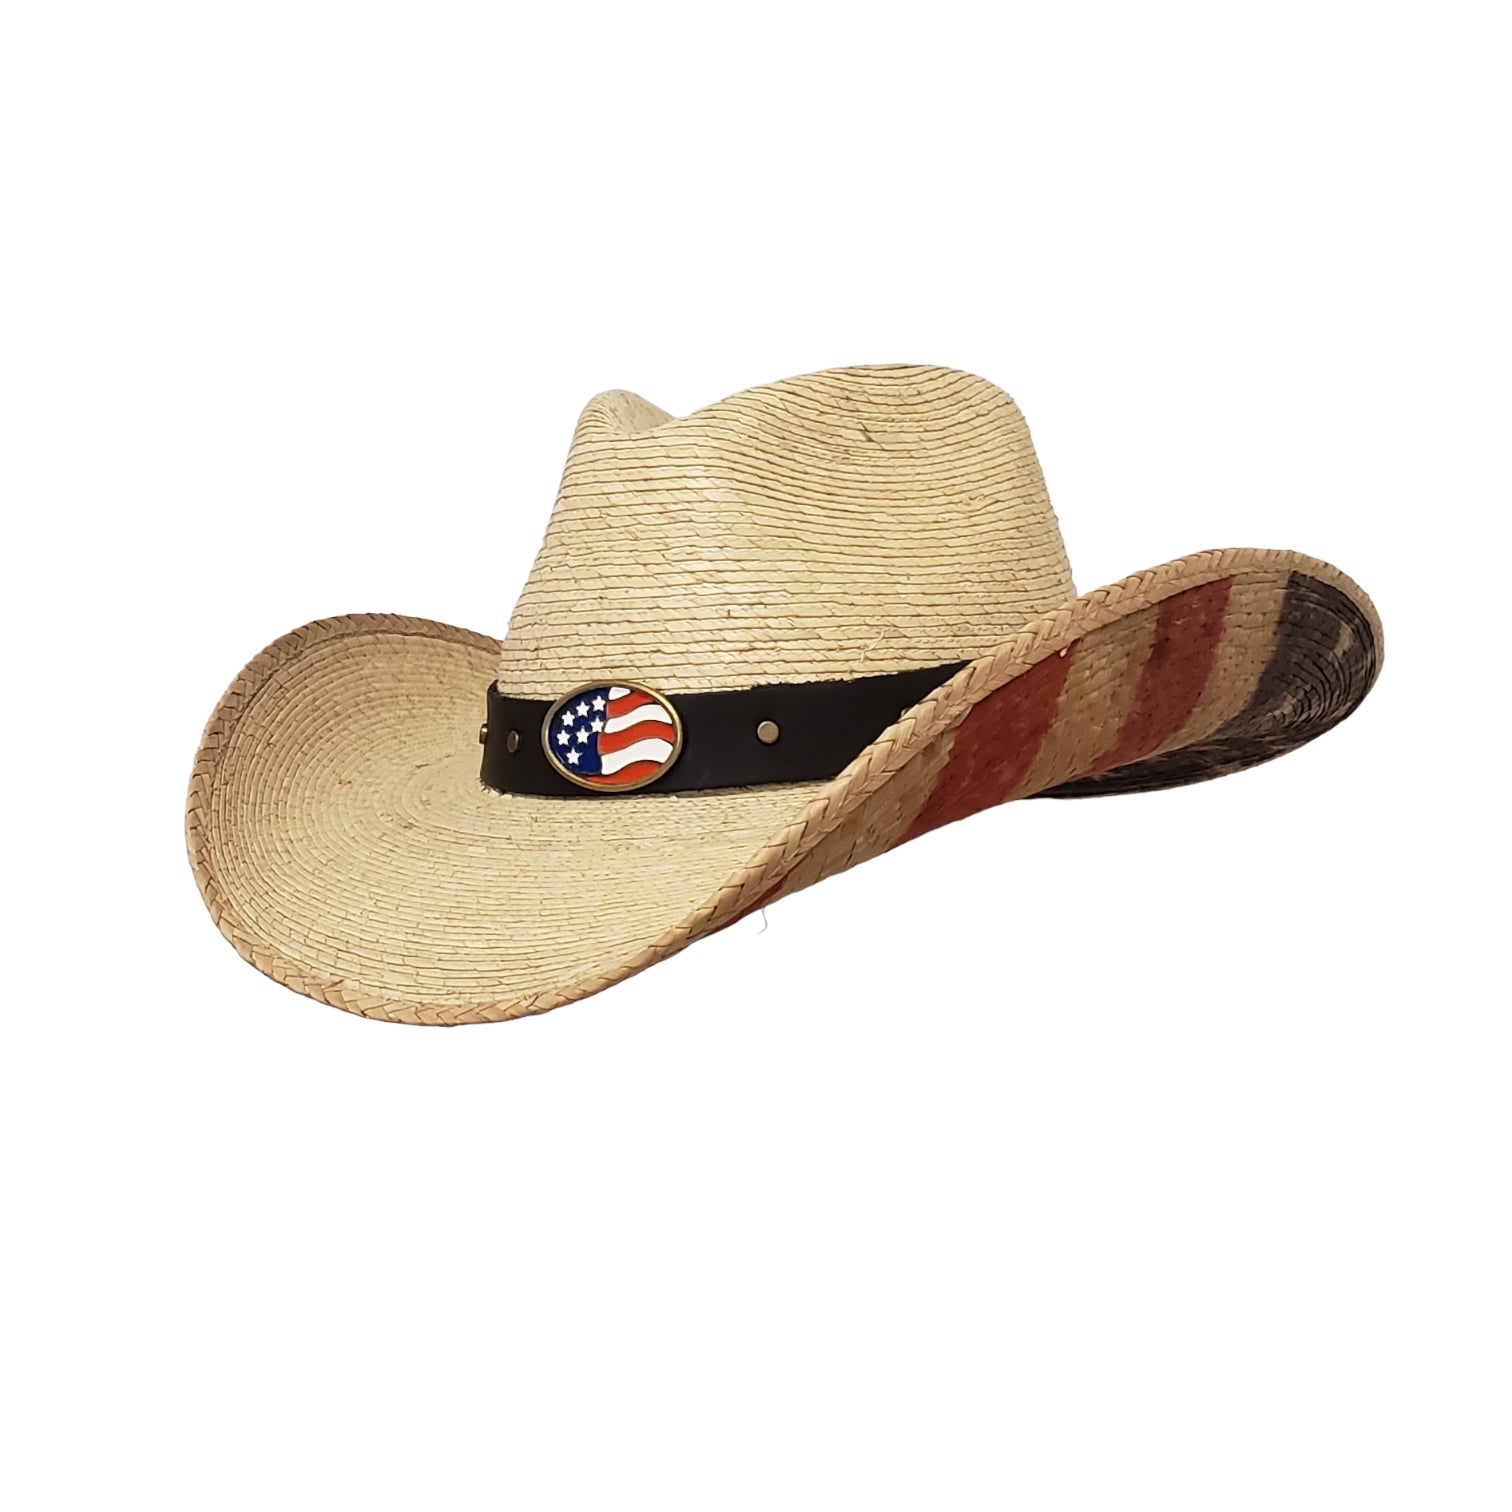 Countrywide White Palm Hat with American Flag Large Fits 7-3/8 to 7-1/2